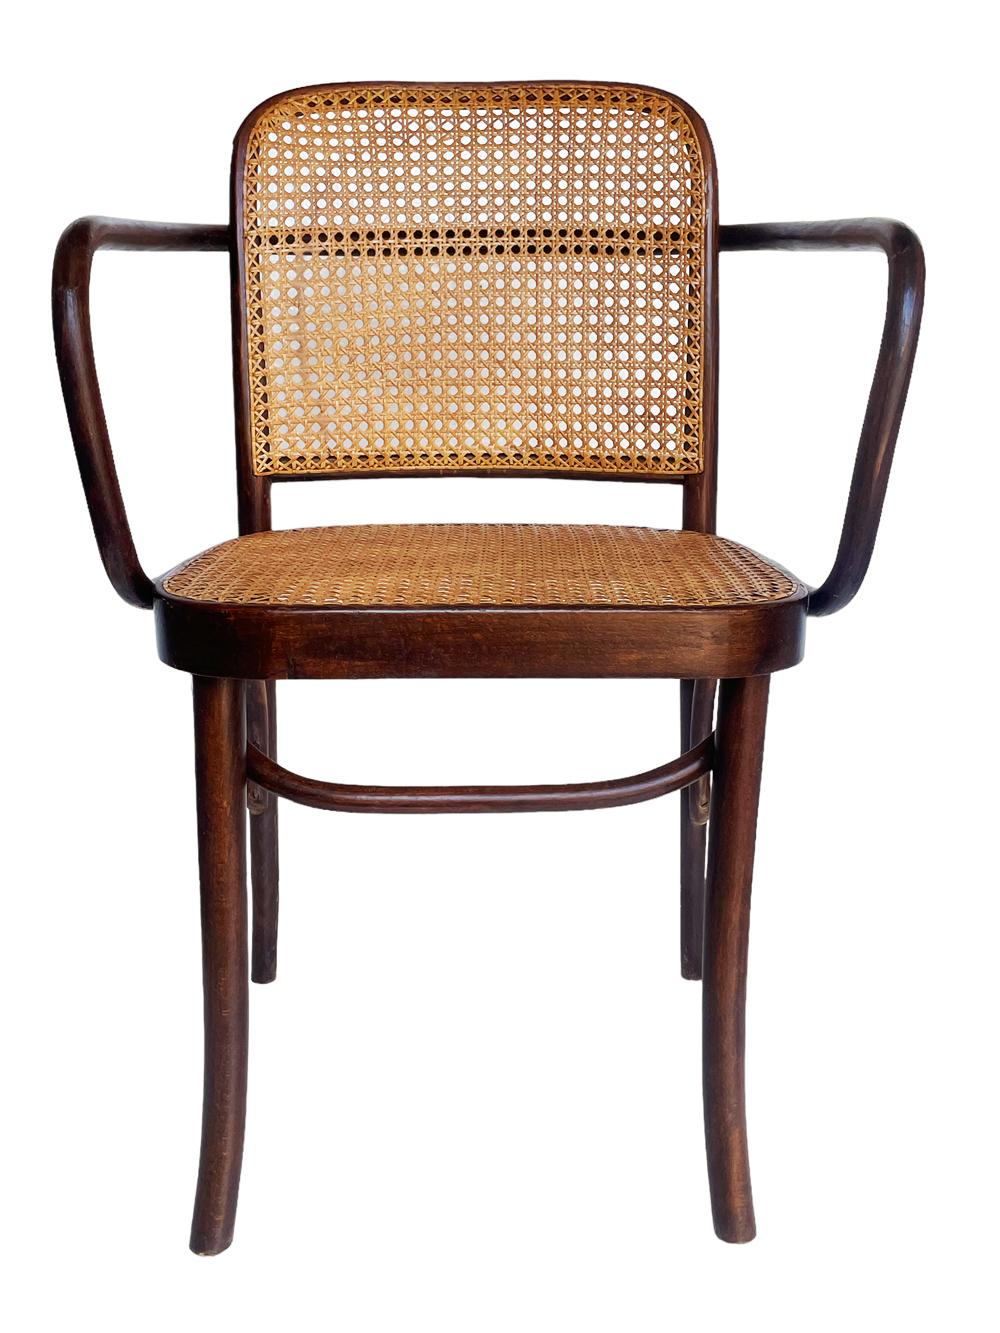 Mid-20th Century Set of 4 Mid-Century Modern Dining Prague Chairs by Josef Hoffmann Cane & Wood For Sale